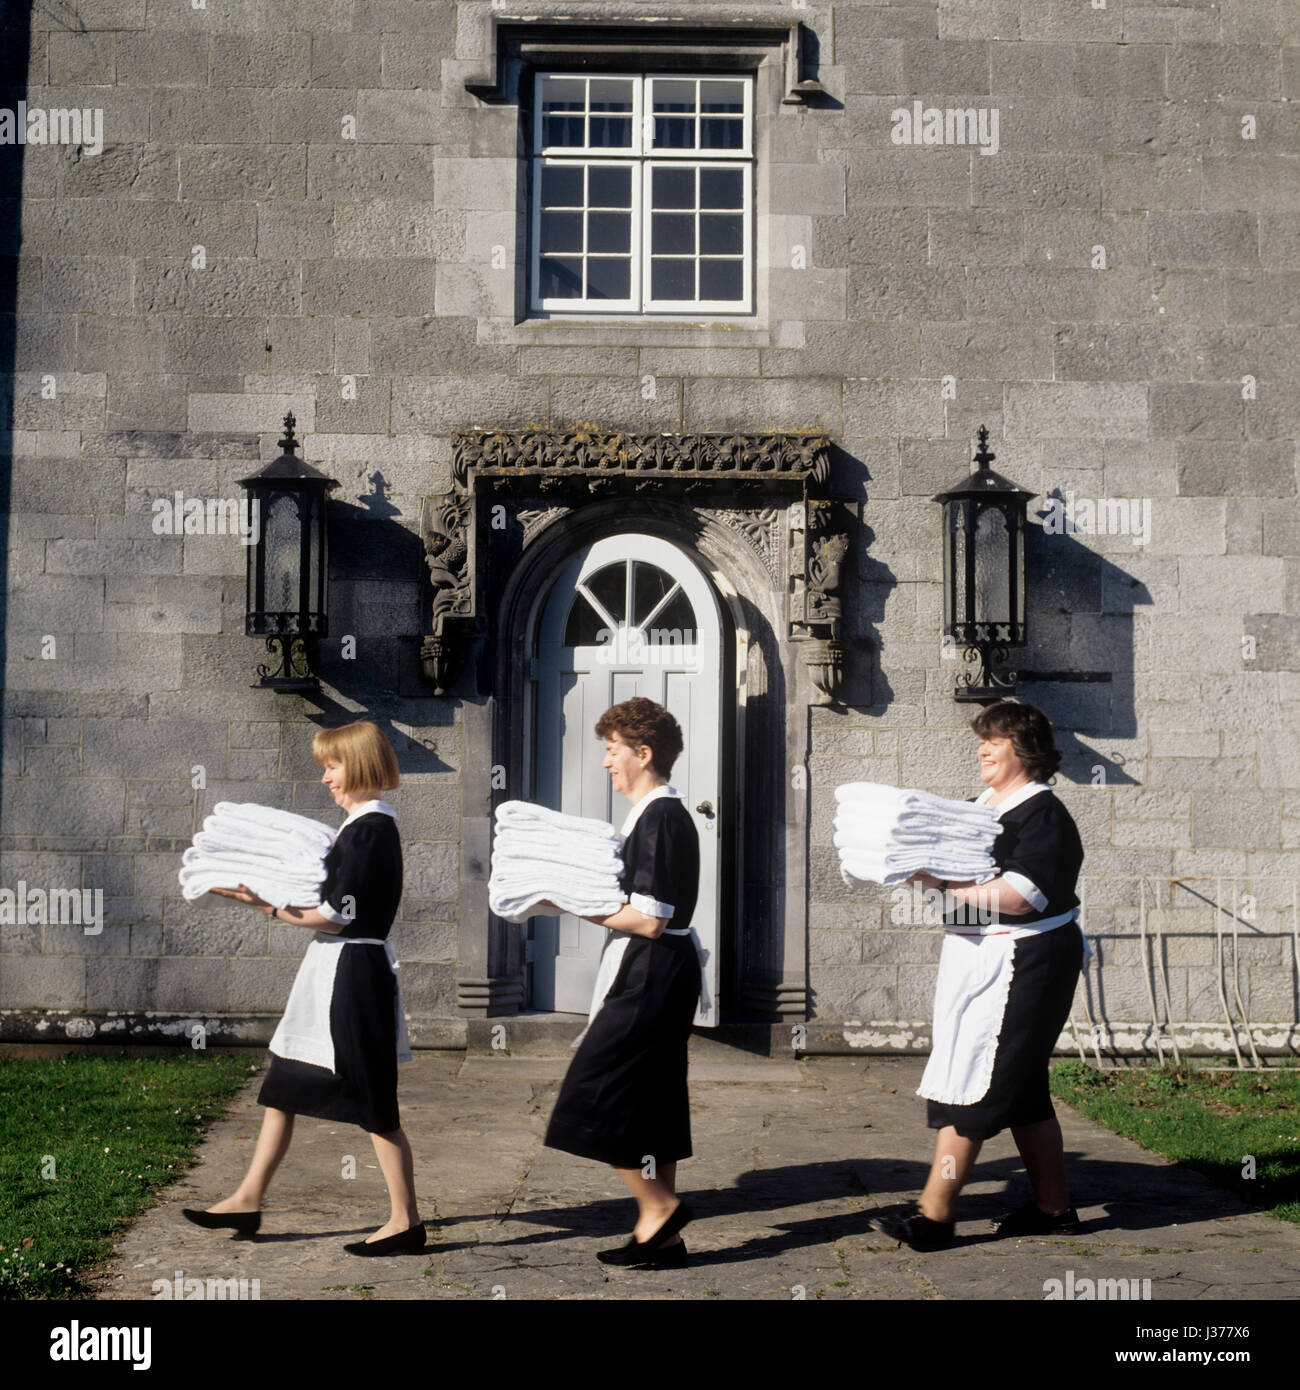 Three maids walking past the entrance of house. Stock Photo